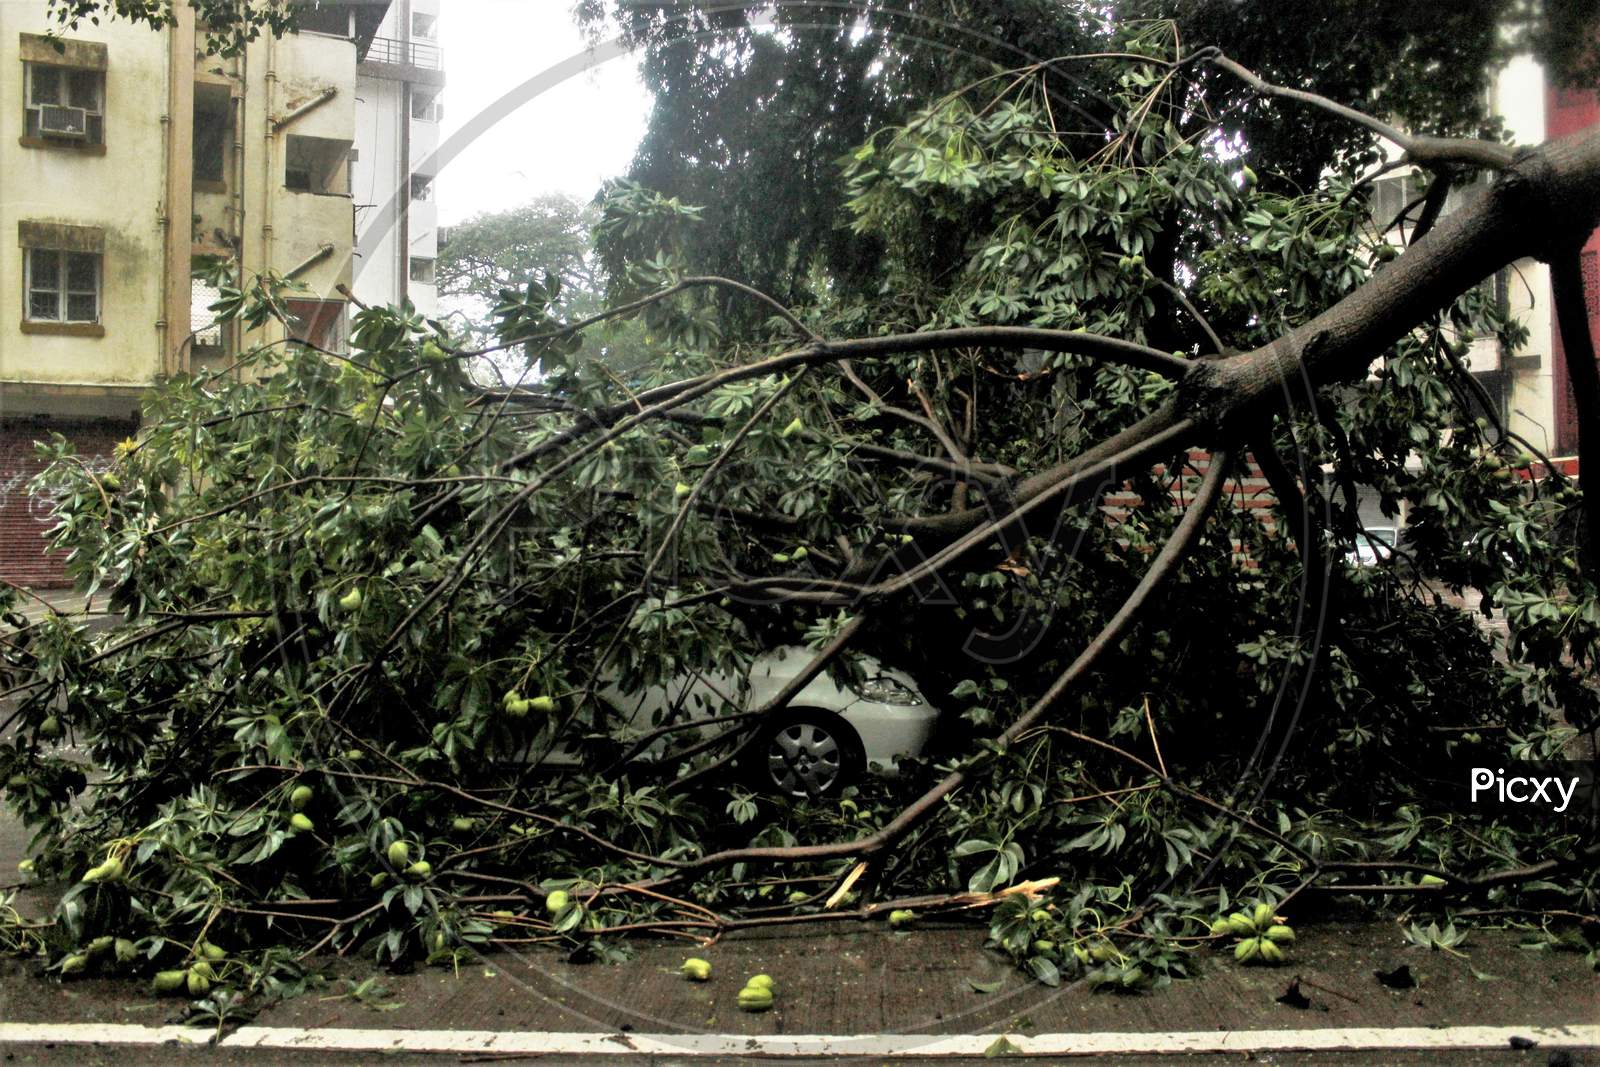 A tree collapses and damages a car during heavy rains, in Mumbai, India on July 7, 2020.